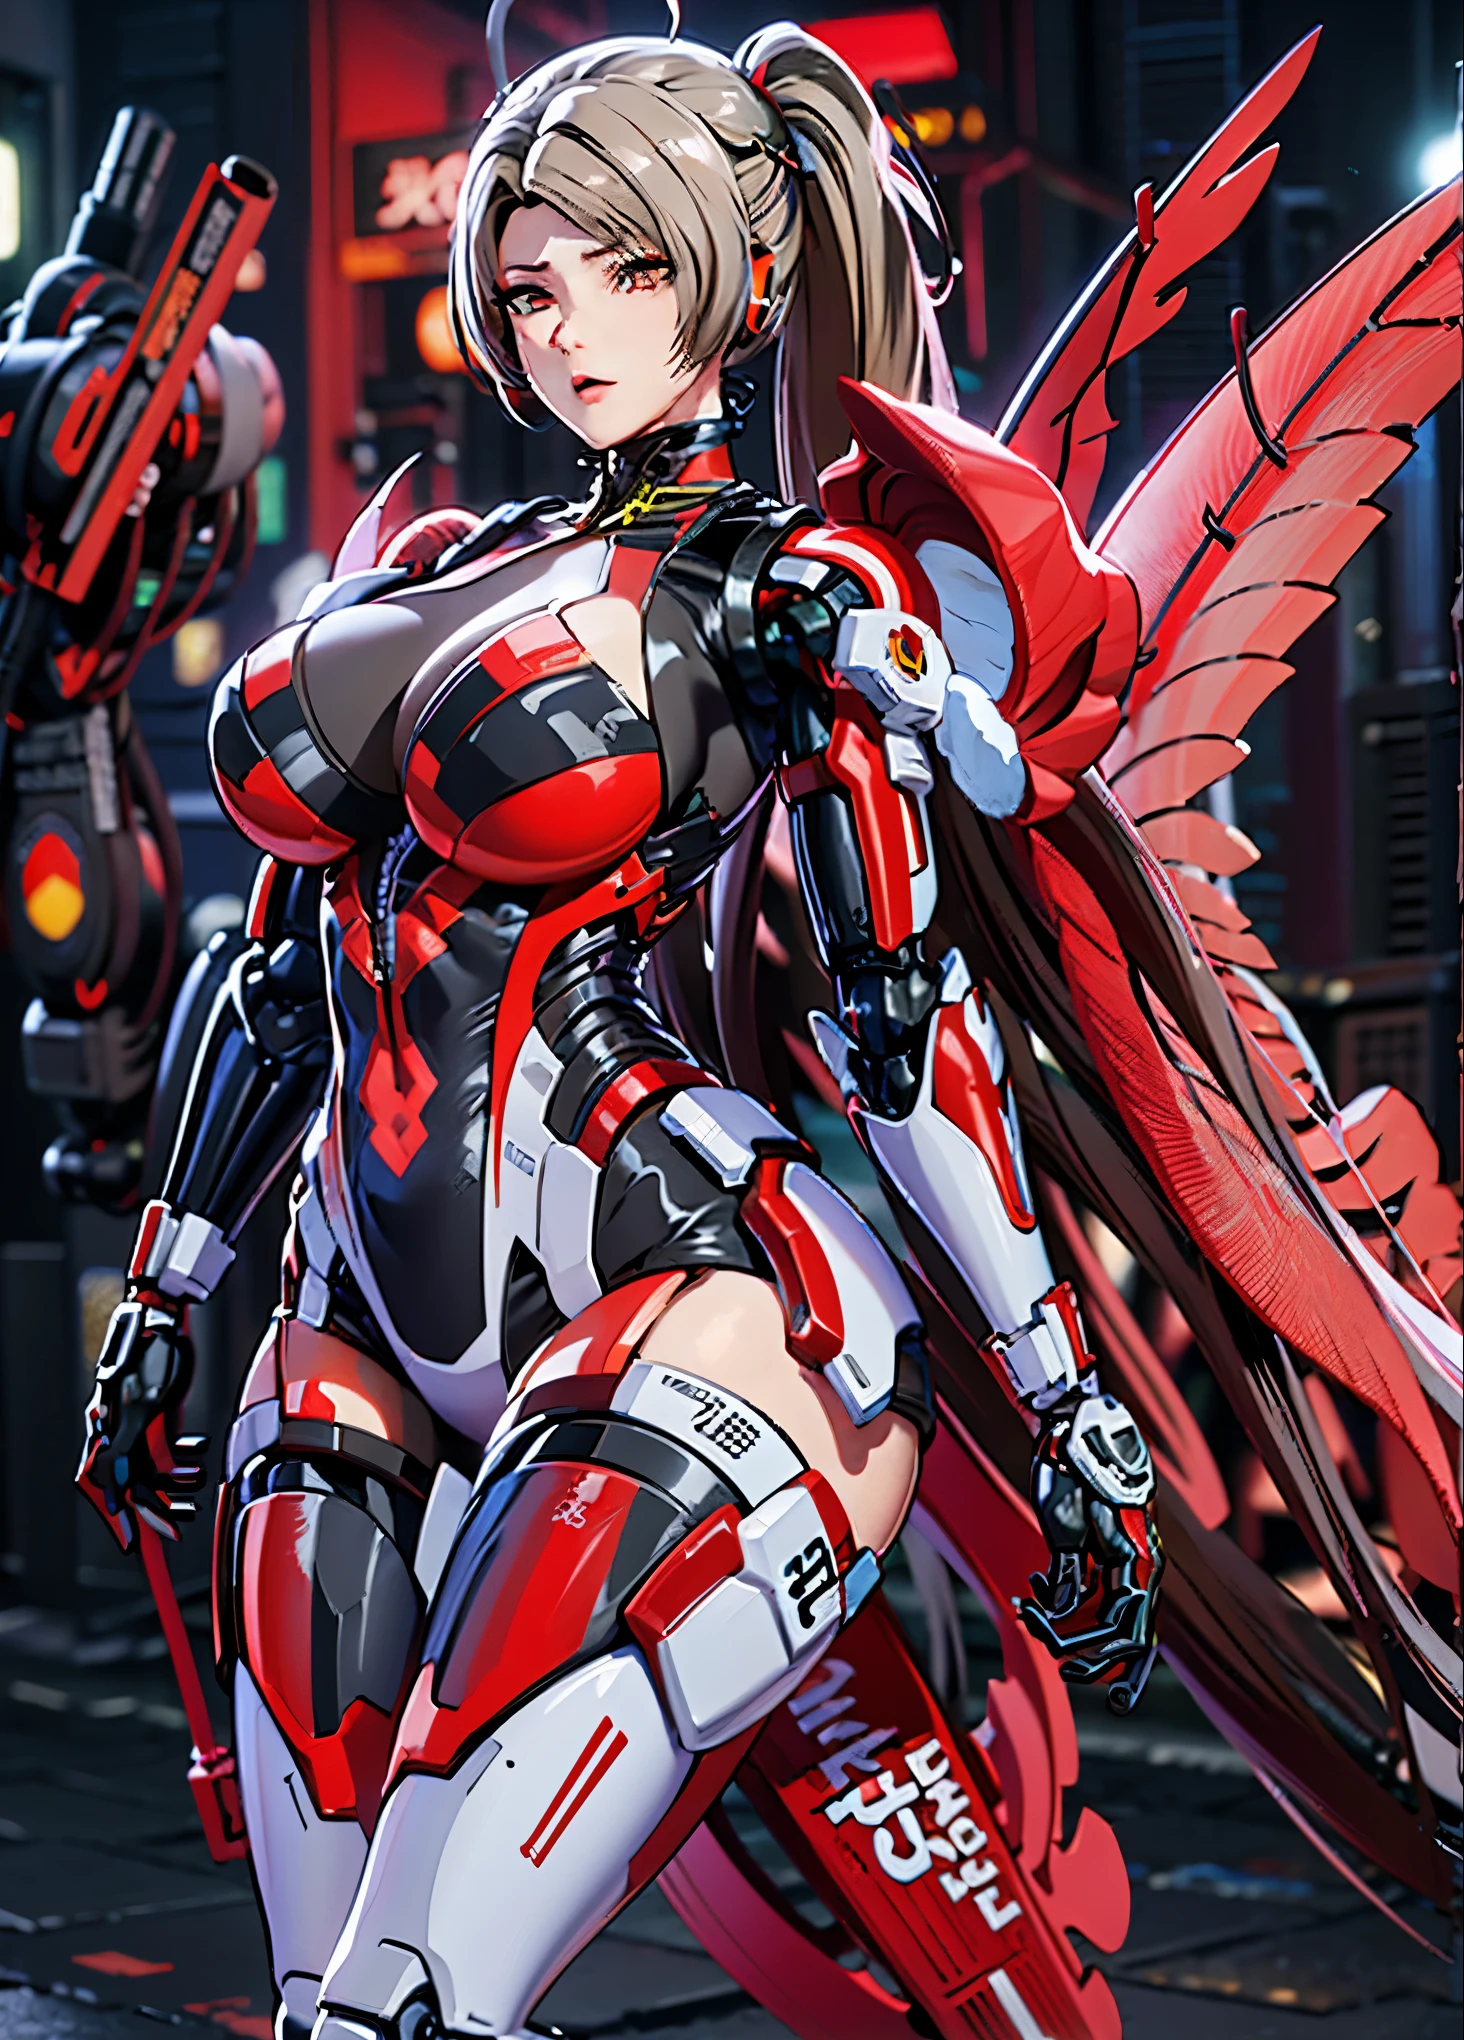 girl 1、highest quality、masterpiece、超A high resolution、Arad woman in futuristic suit with red mechanical wings and sword, A girl wearing a black shiny mechanical cyber armor.., Cyberpunk Anime Girl Mecha, Anime robots and organic matter mix together, Mechanized Black Valkyrie Girl, perfect anime cyborg woman, cute cyborg girl, female mecha, A simple futuristic cyborg, beautiful girl cyborg, beautiful robot character design,((Super realistic details))， Realistic character art rendering 8K, anime robot、(red glowing eyes)、have a sword、((mai shiranui))、high ponytail、4K、(((highest quality)))、(((mechanical headgear:1.3)))、(((very well-groomed face:1.3)))、(((No expression)))、(((cyber headphones:1.3)))、(((Long ear antennae:1.6)))、(((Anime related)))、(((Machine eyes glowing red:1.3)))